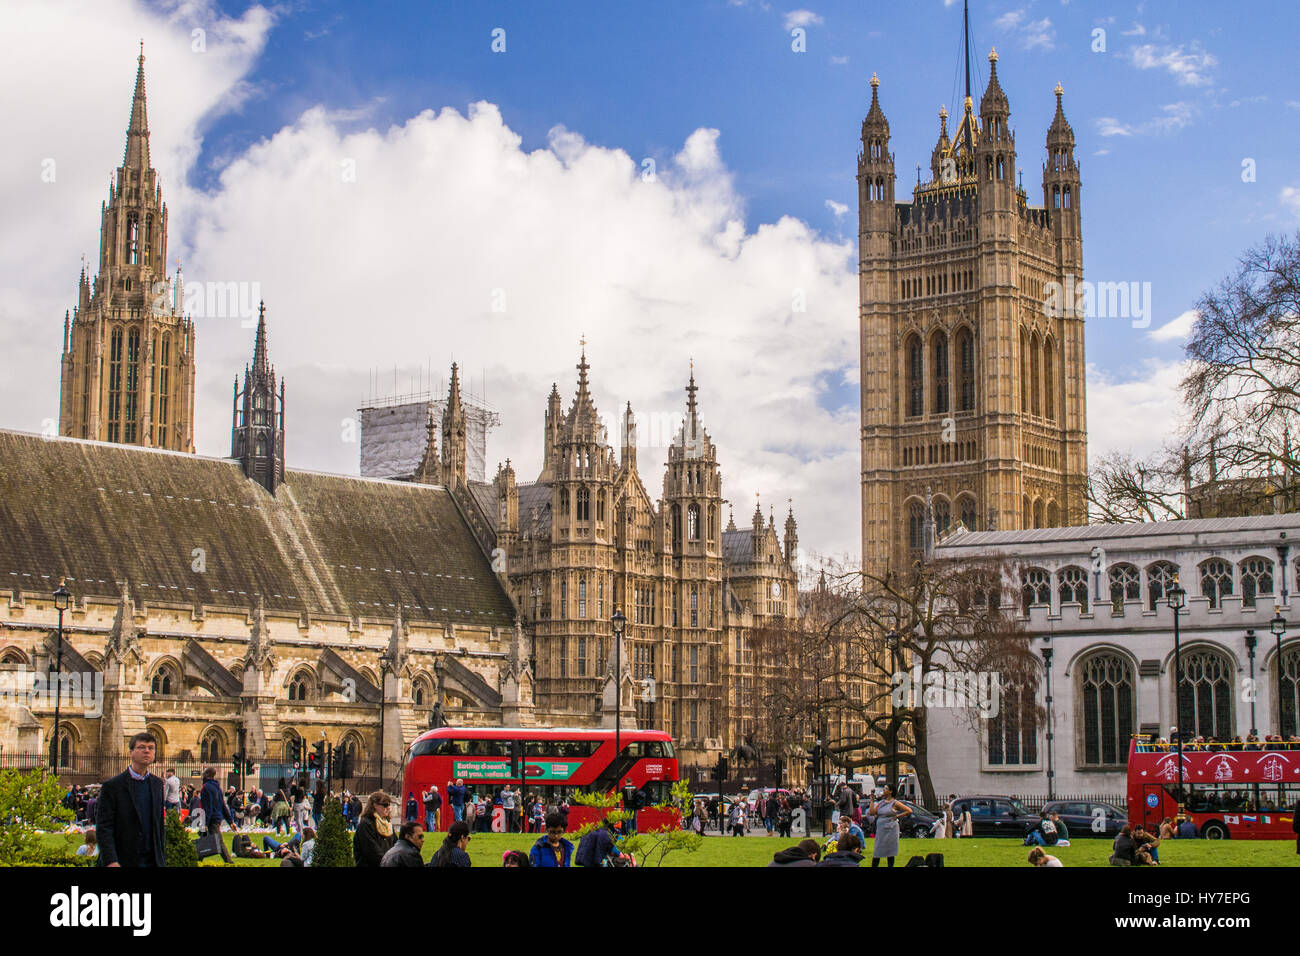 Westminster-Palast (Houses of Parliament) vom Parliament Square, London gesehen. Stockfoto